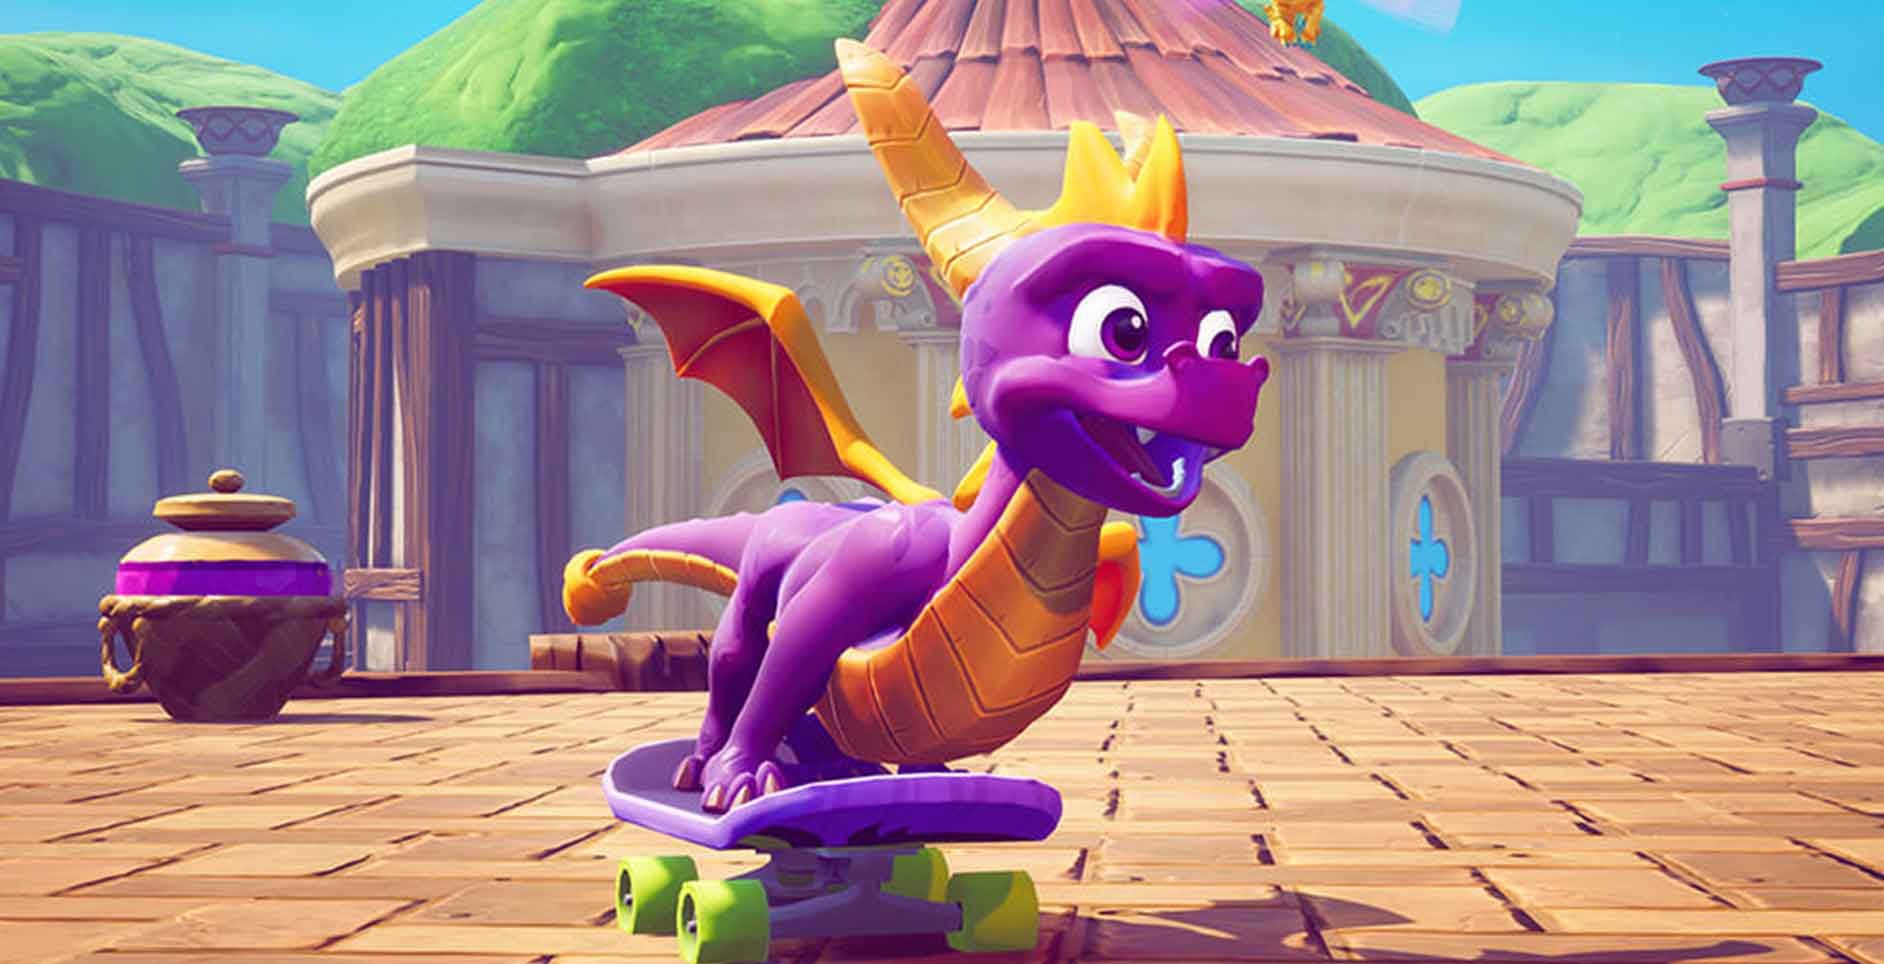 The Full Trophy List Now Revealed For Spyro Reignited Trilogy